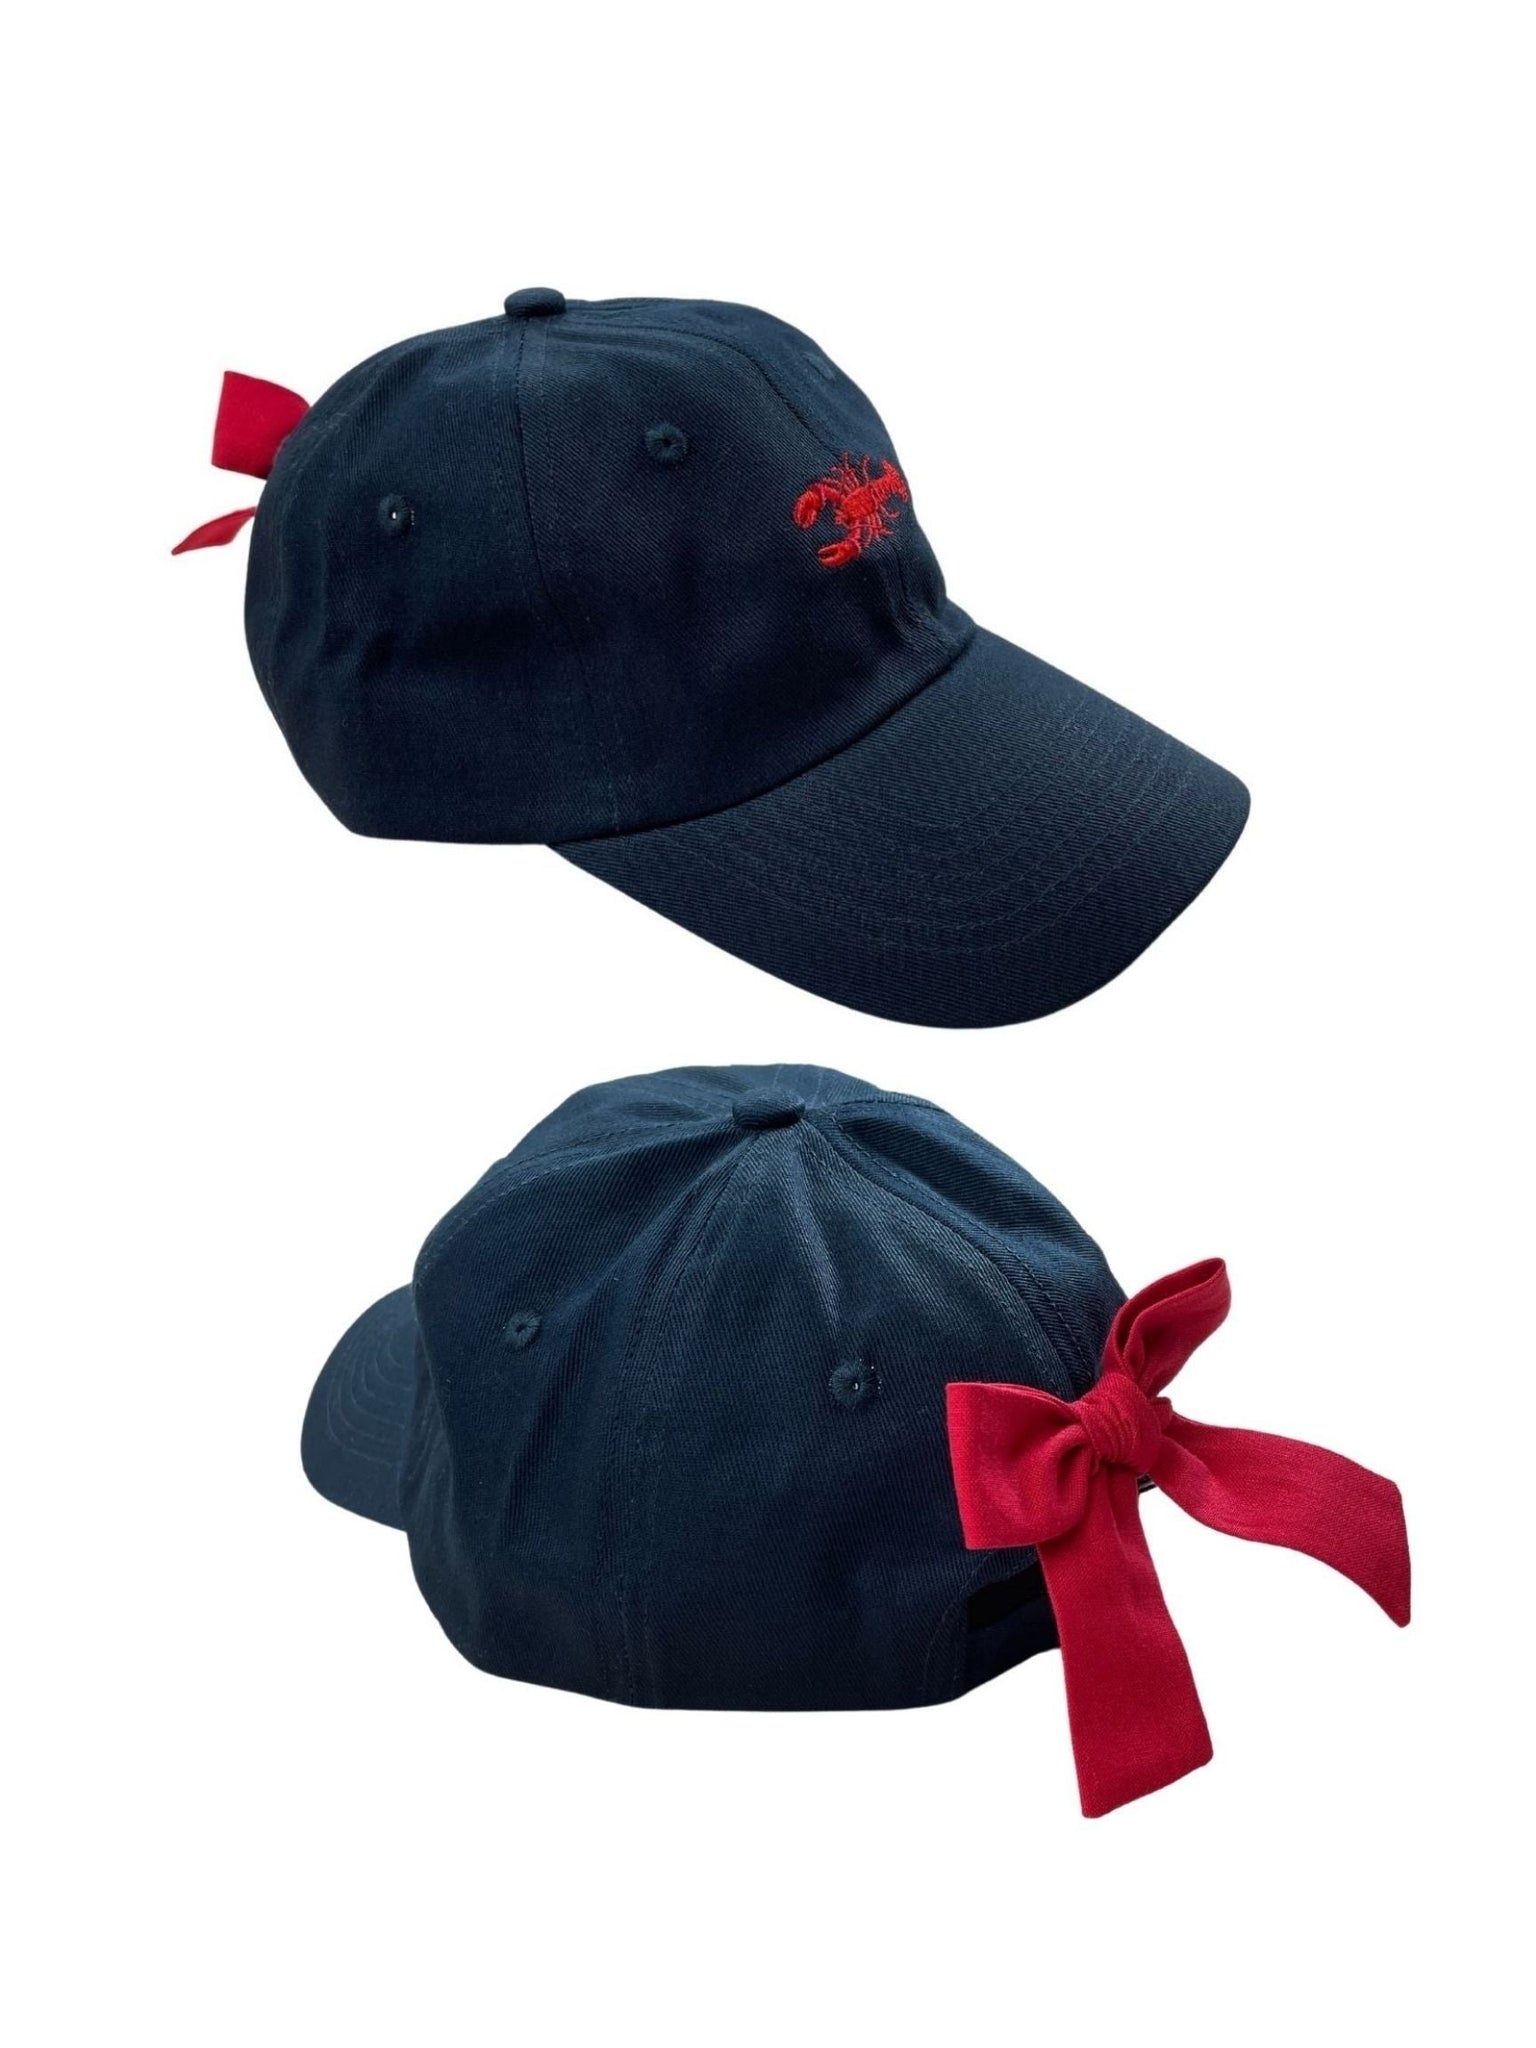 navy baseball hat with red bow and lobster on front